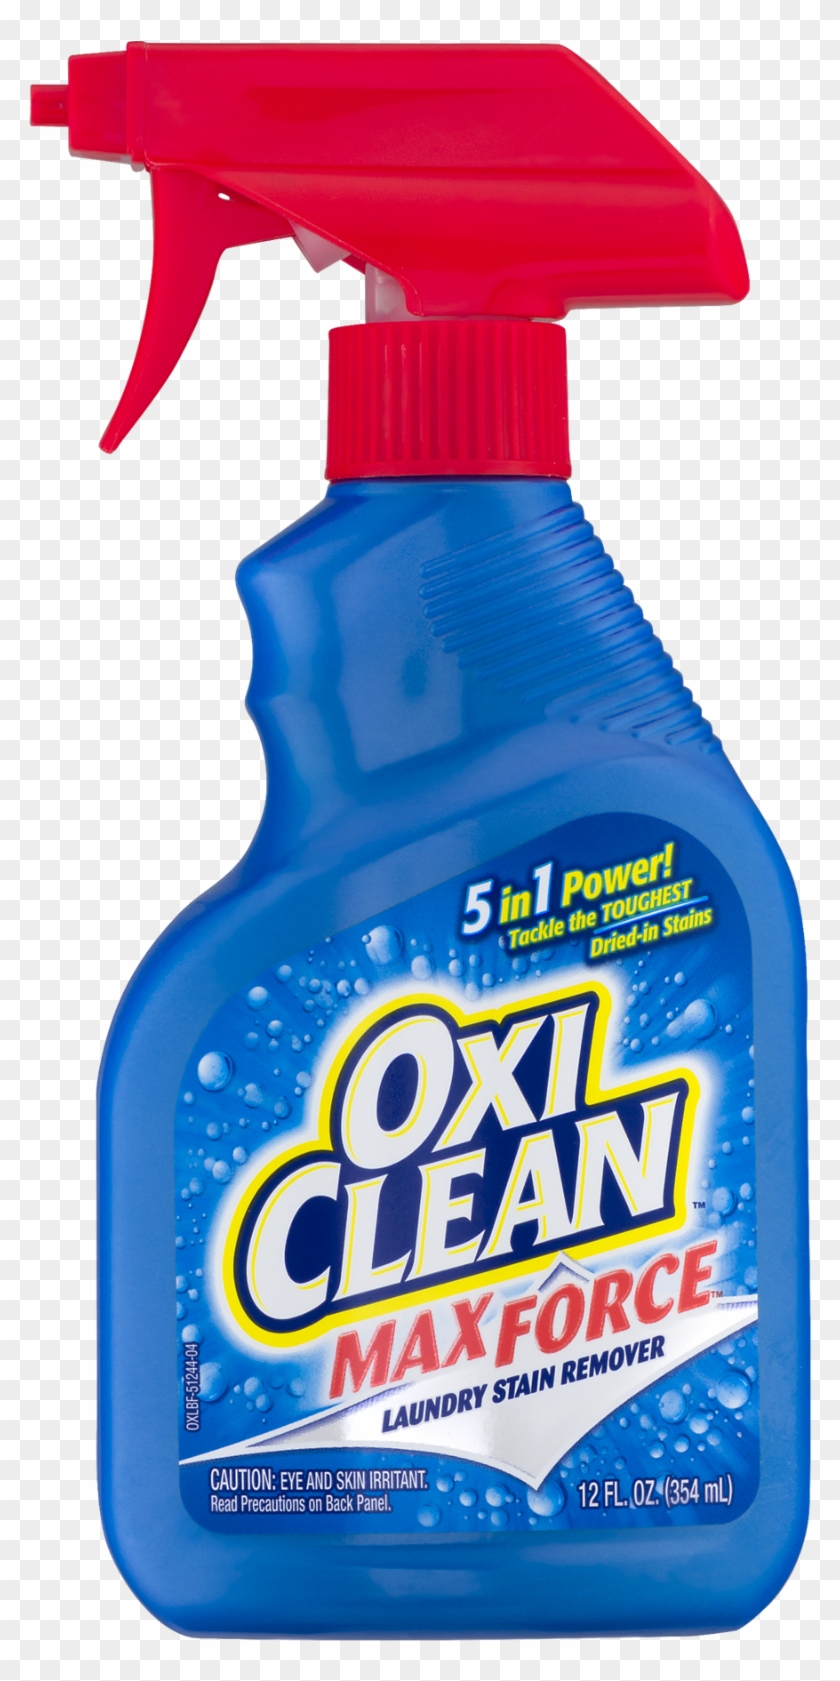 Buy Oxiclean Cdc 5703751244 Laundry Stain Remover 12 - Oxiclean Max Force Laundry Stain Remover Clipart #3952203